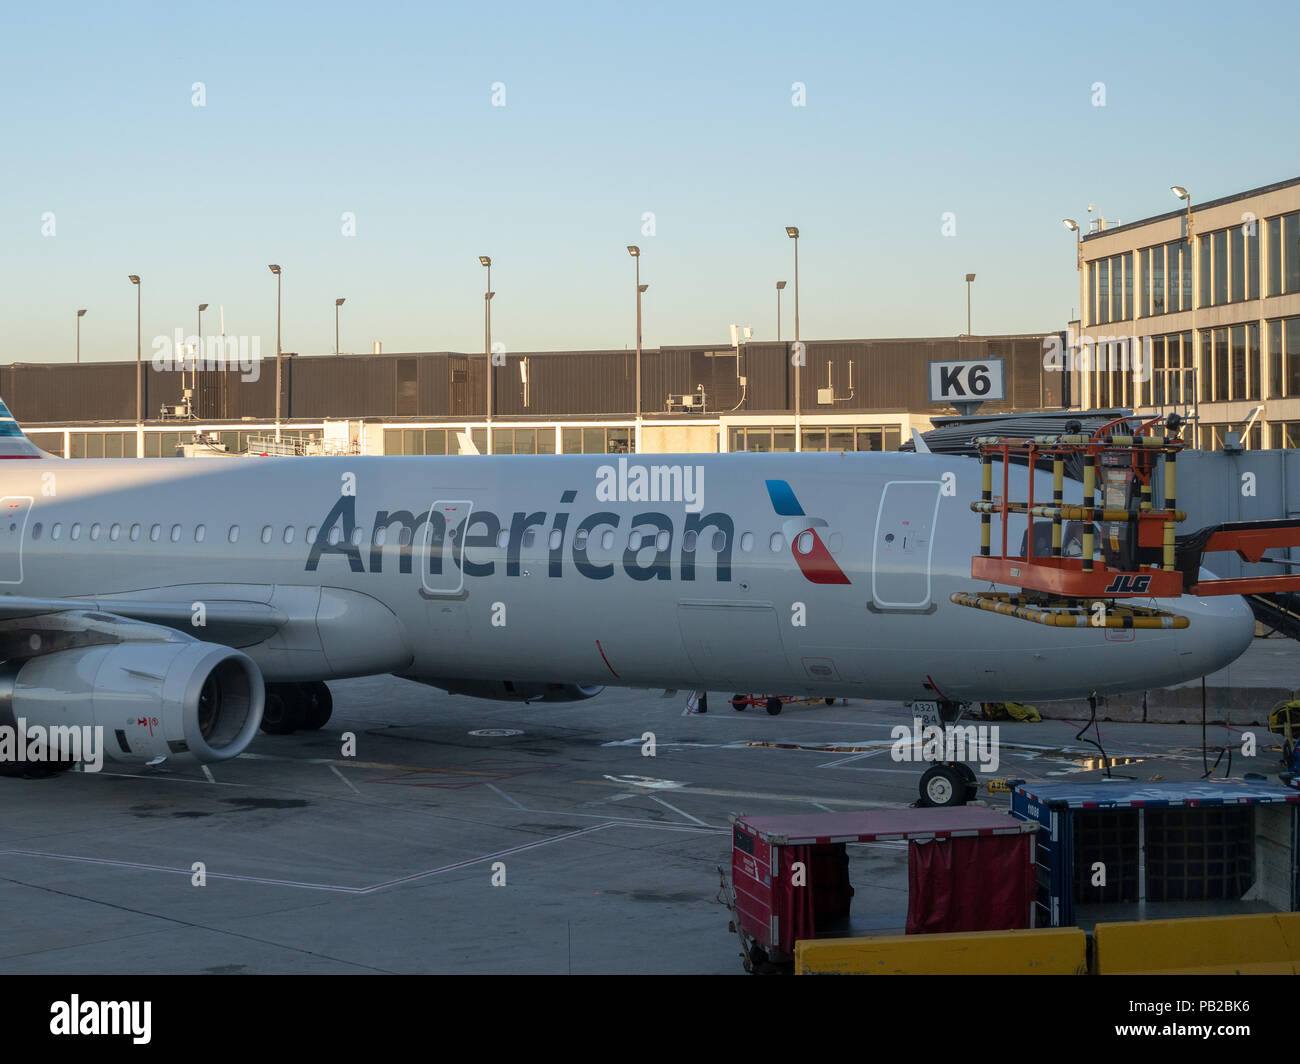 An American Airlines plane refuels at a terminal at San Francisco International Airport SFO  Stock Photo